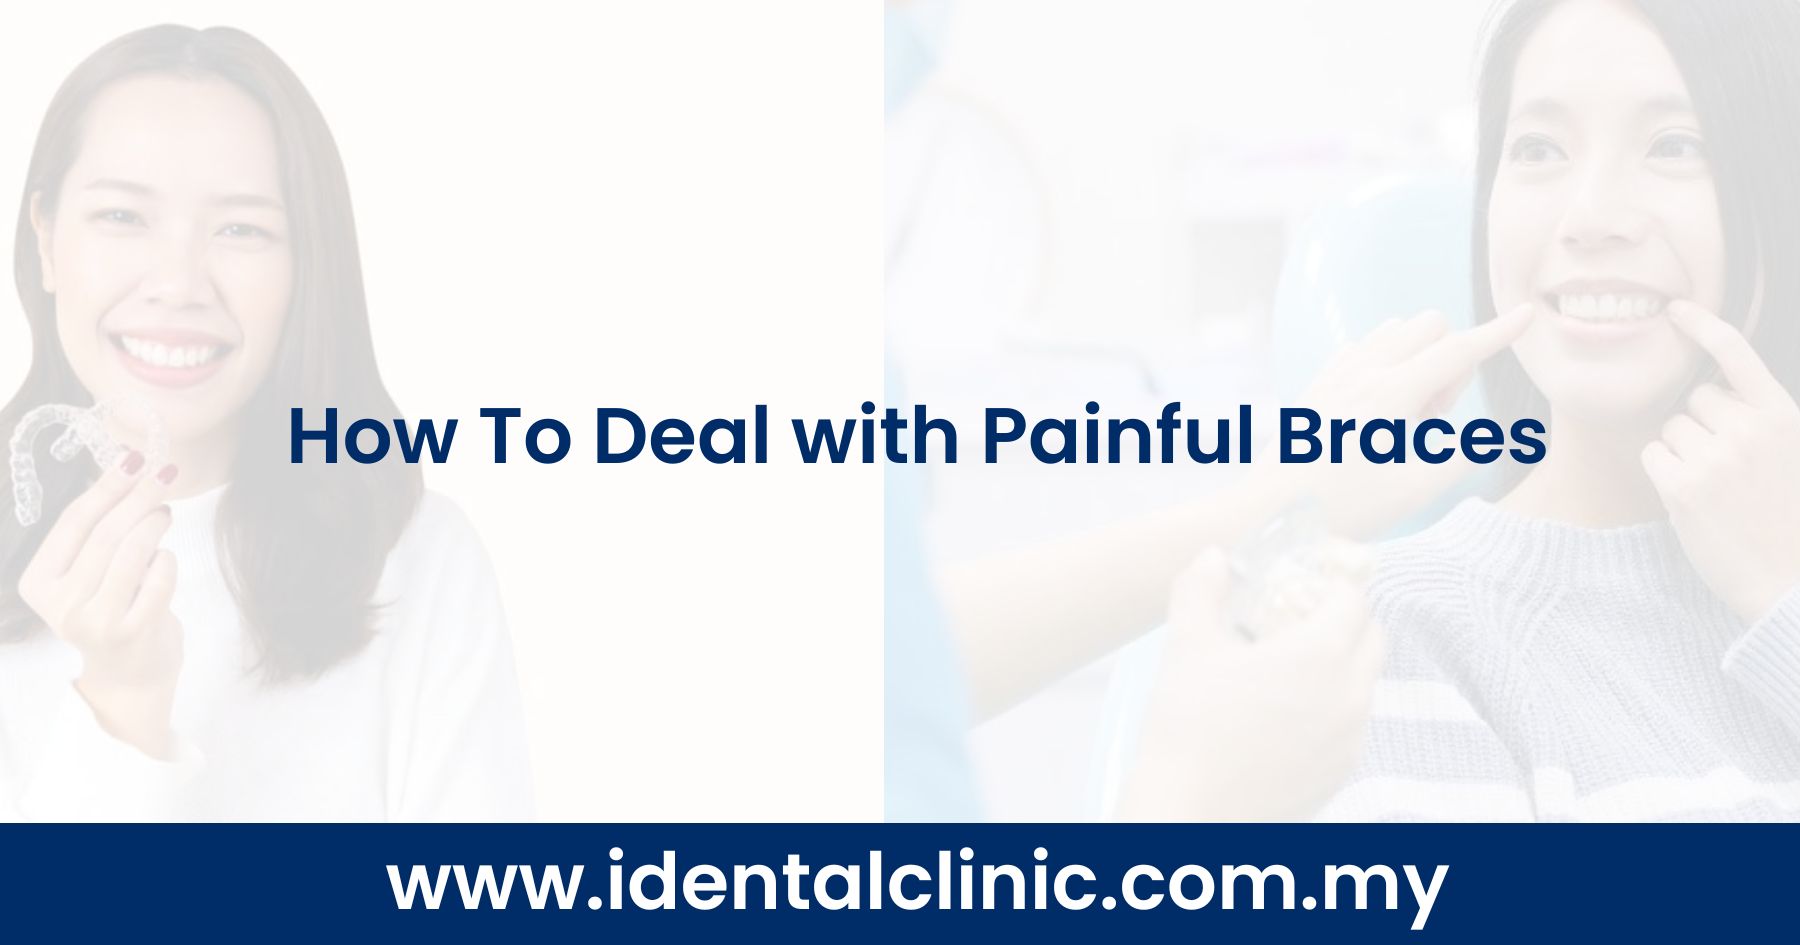 How To Deal with Painful Braces